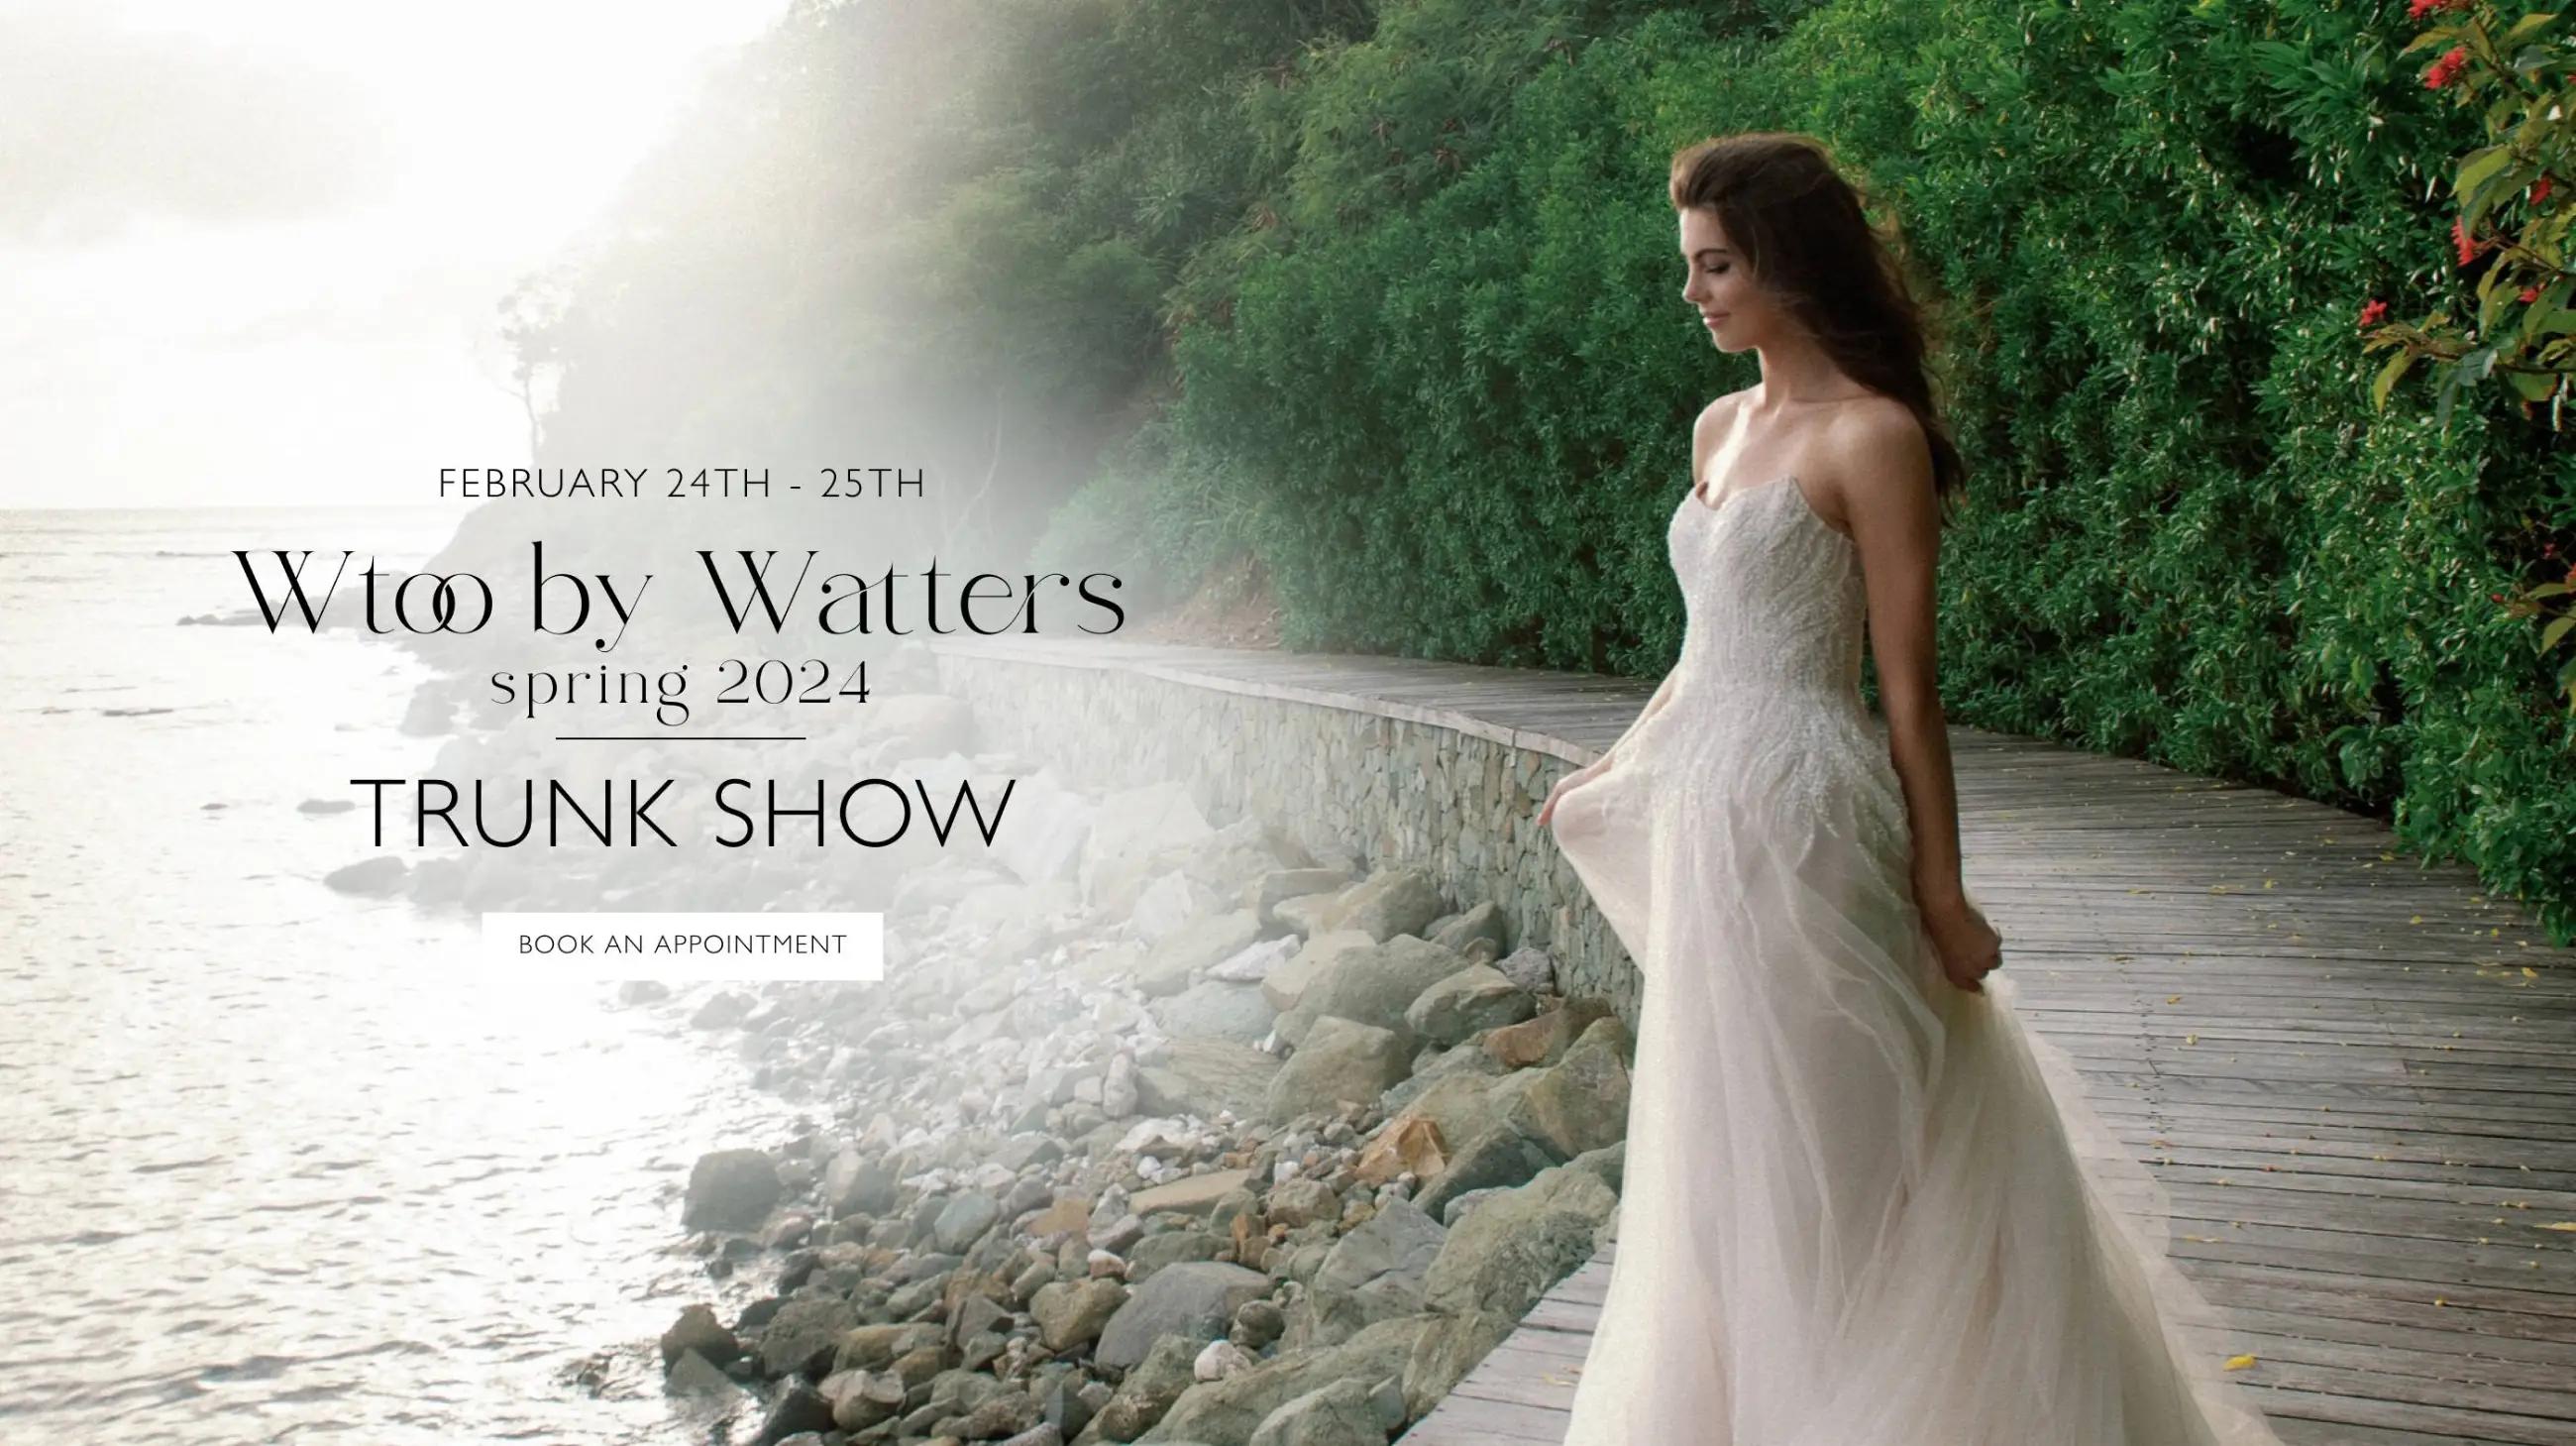 Wtoo by Watters Spring 2024 Trunk Show Banner